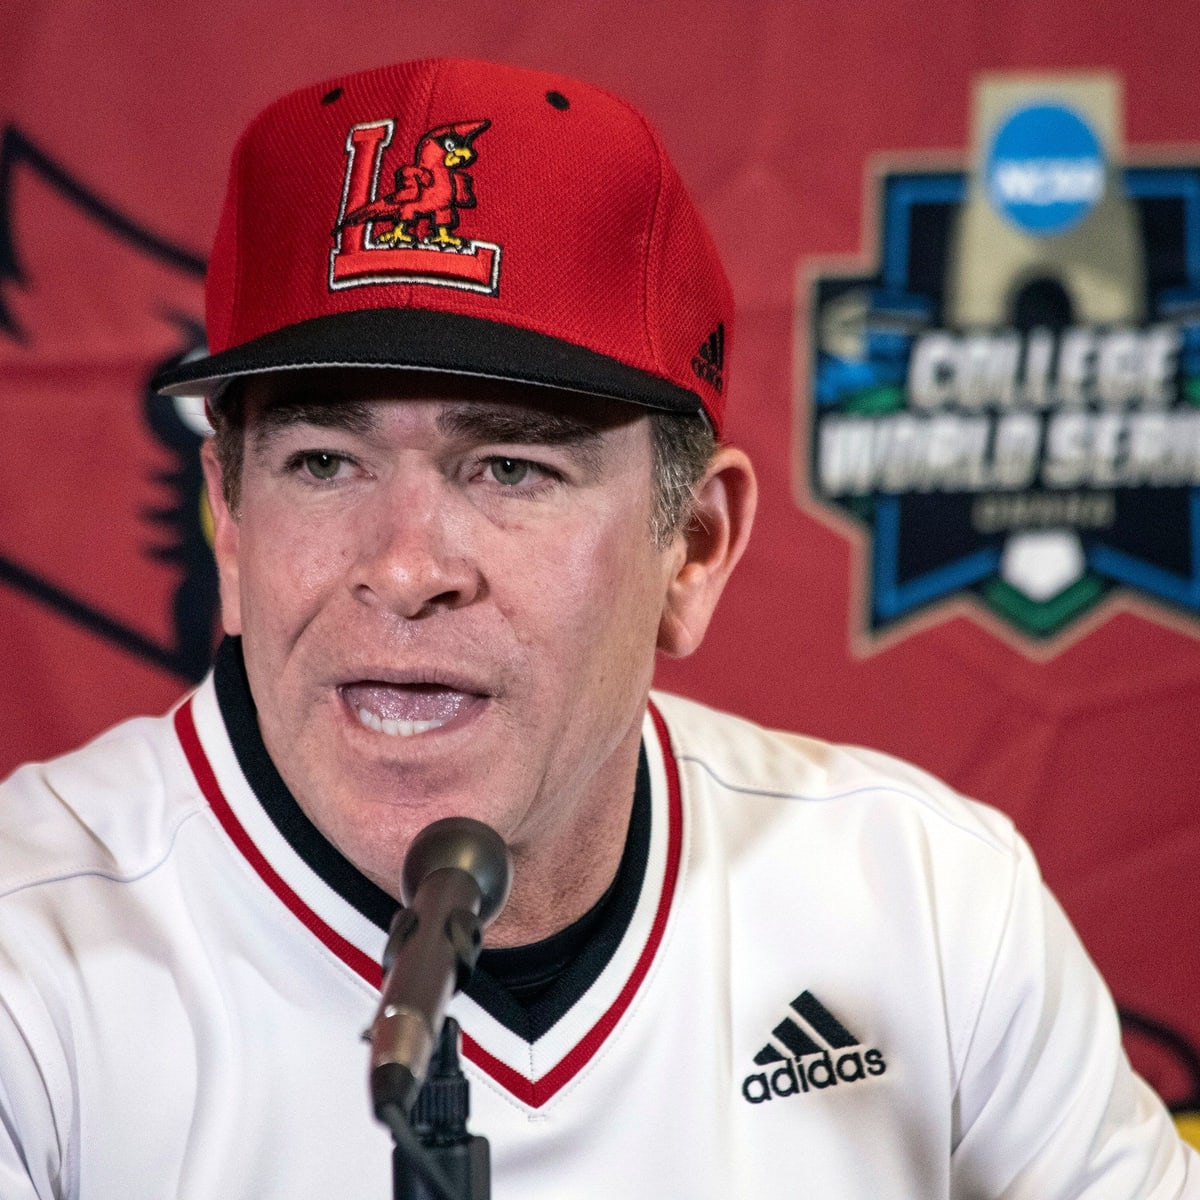 Being ranked No. 1 'very cool' for Louisville baseball, Dan